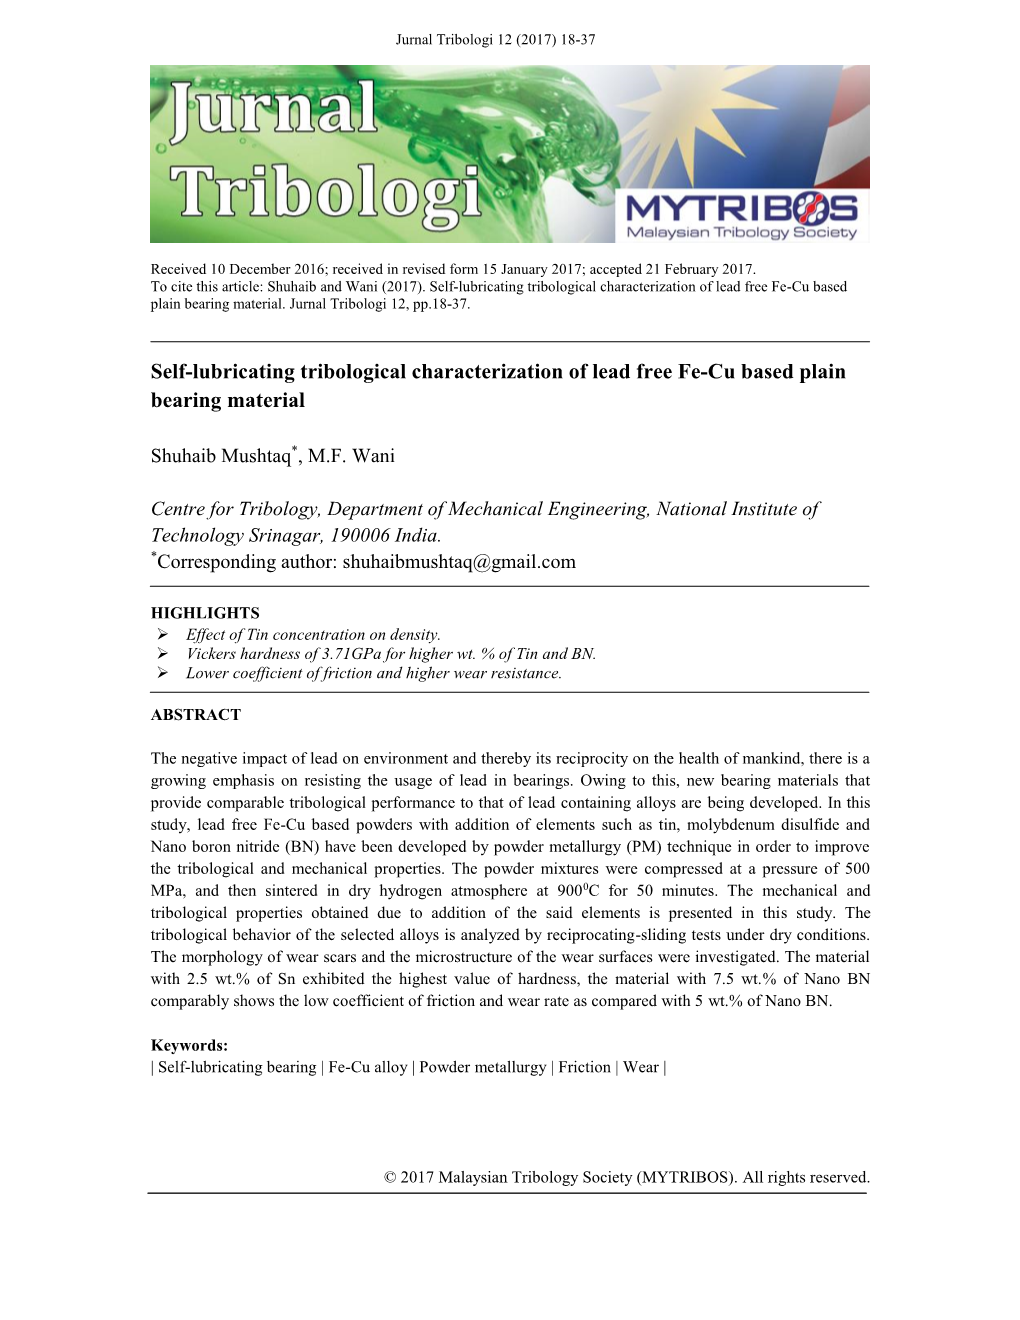 Self-Lubricating Tribological Characterization of Lead Free Fe-Cu Based Plain Bearing Material